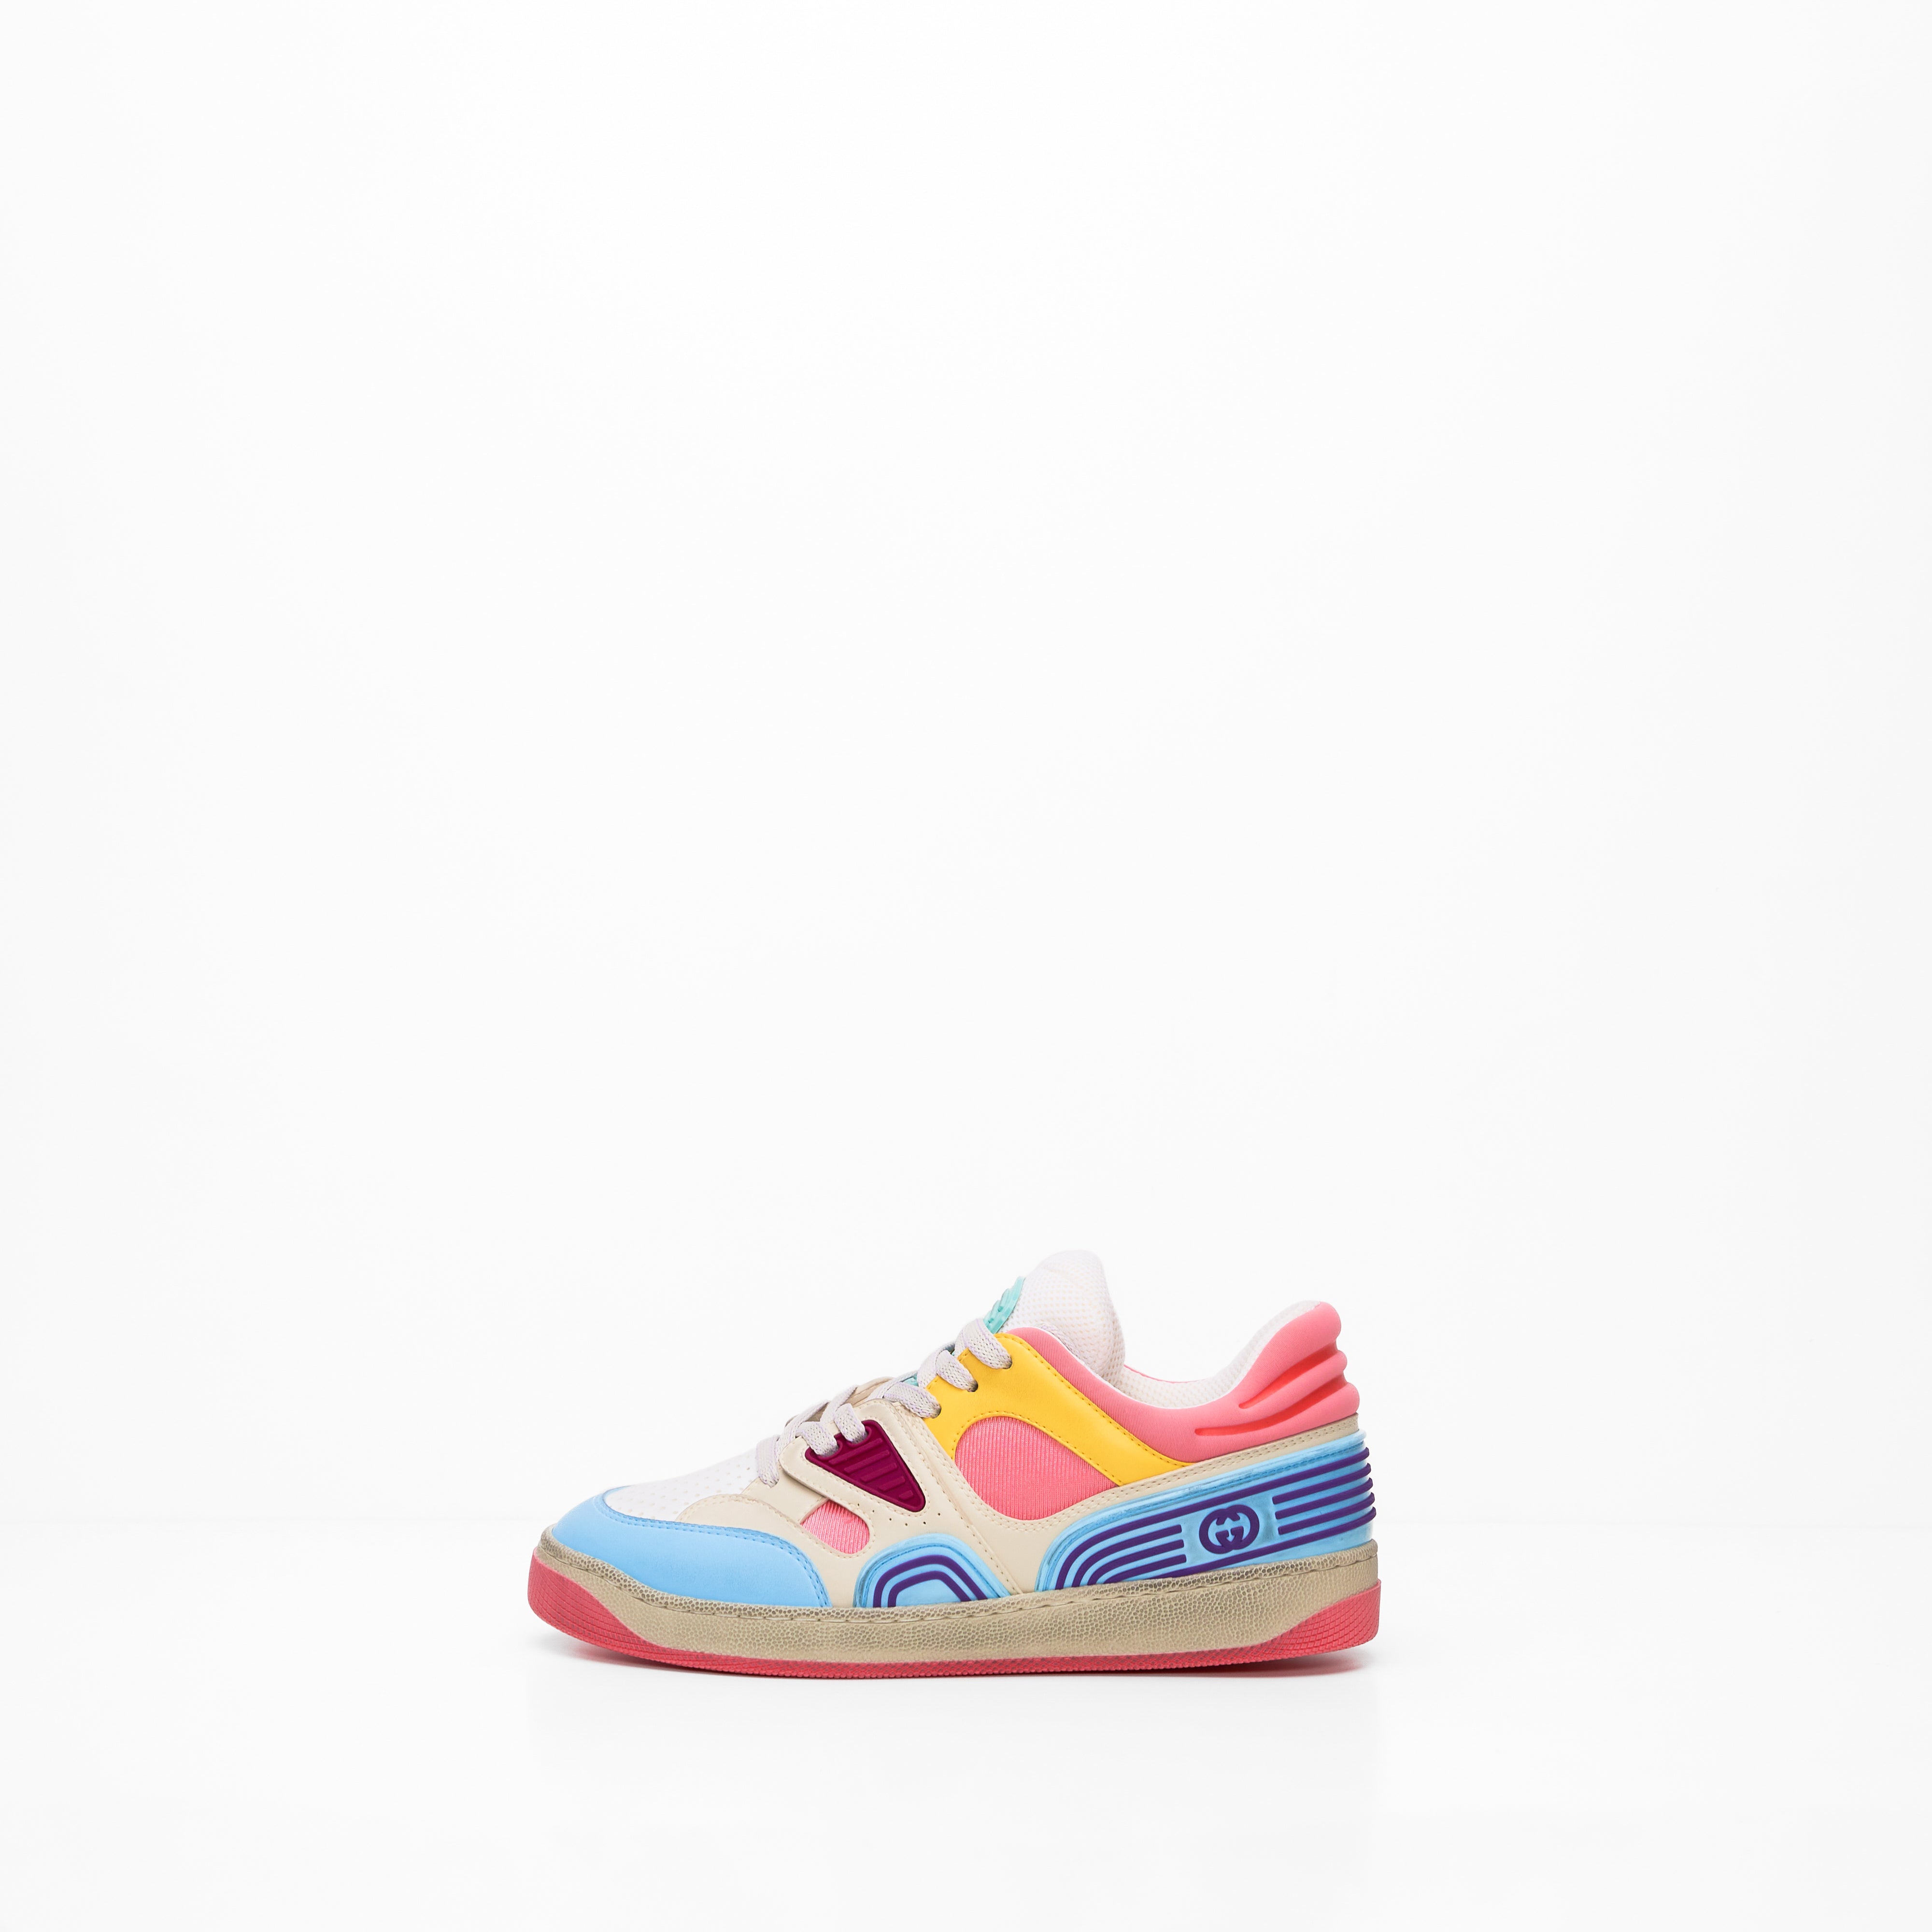 Gucci Sneakers Basket in cream/light blue/yellow